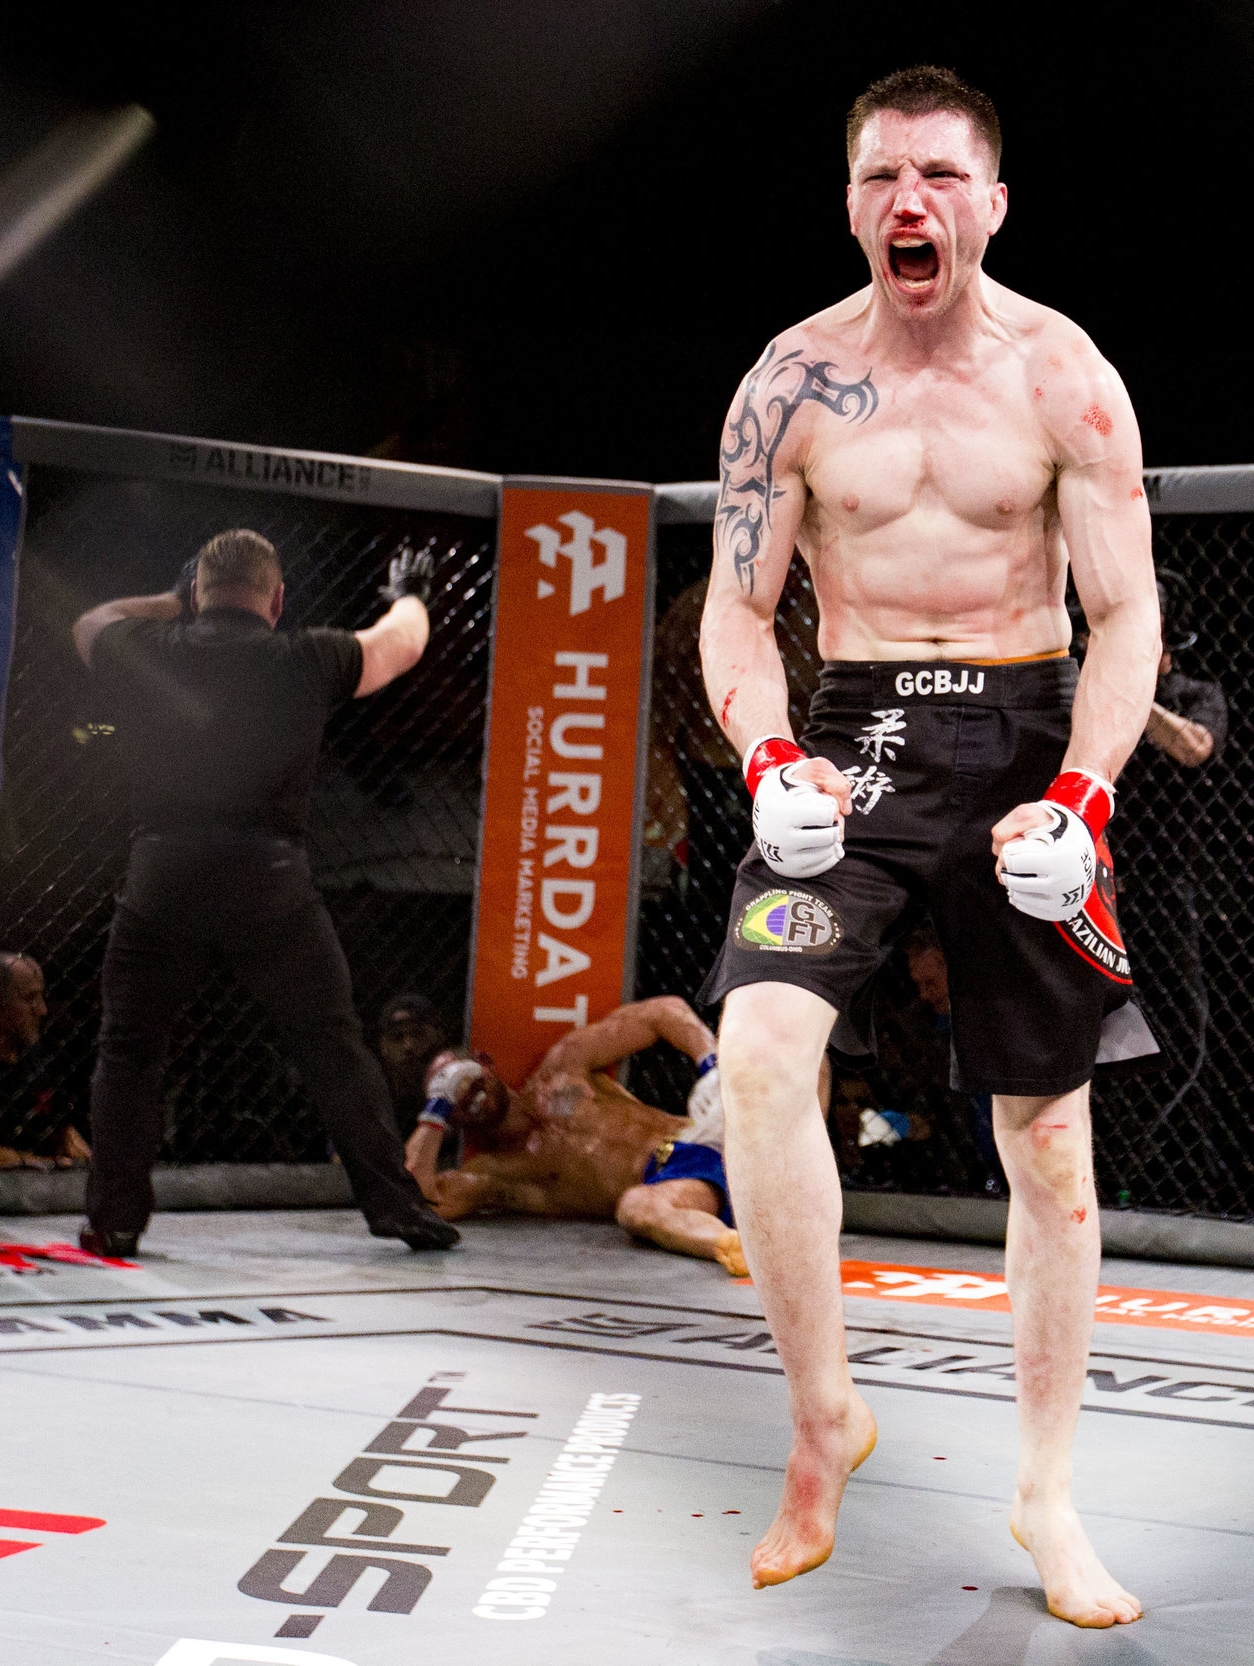  An MMA fighter celebrates after his knockout win during the Alliance MMA competition at the Arnold Sports Festival in Columbus, Ohio on March 3, 2018. 